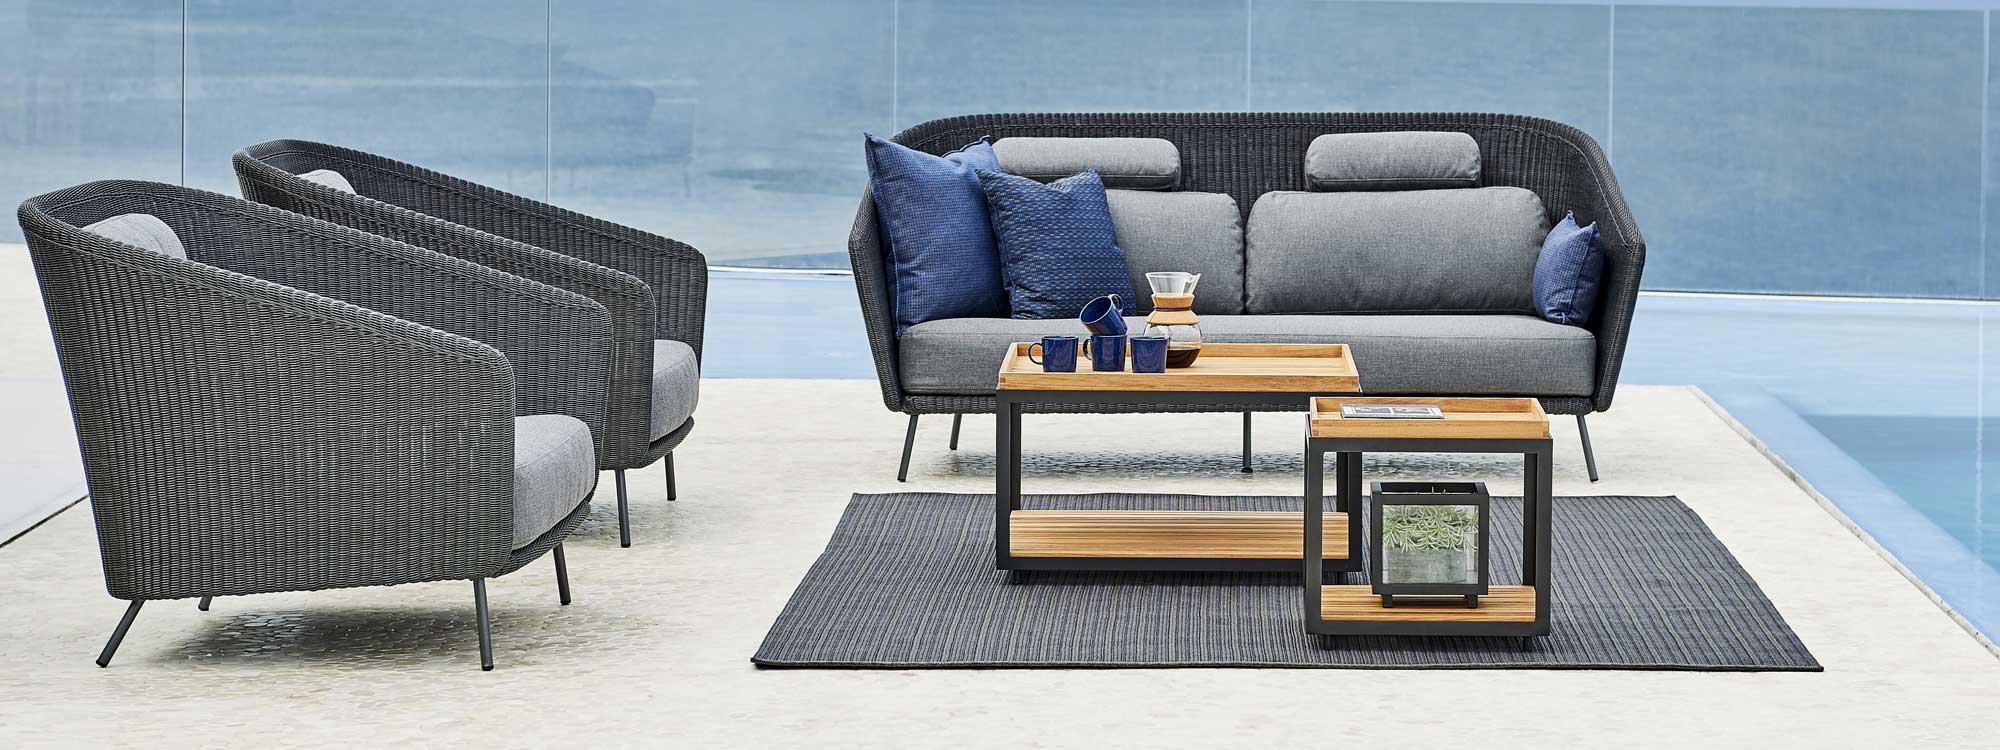 Image of Cane-line Level low tables on outdoor rug, surrounded by Cane-line Mega garden lounge set